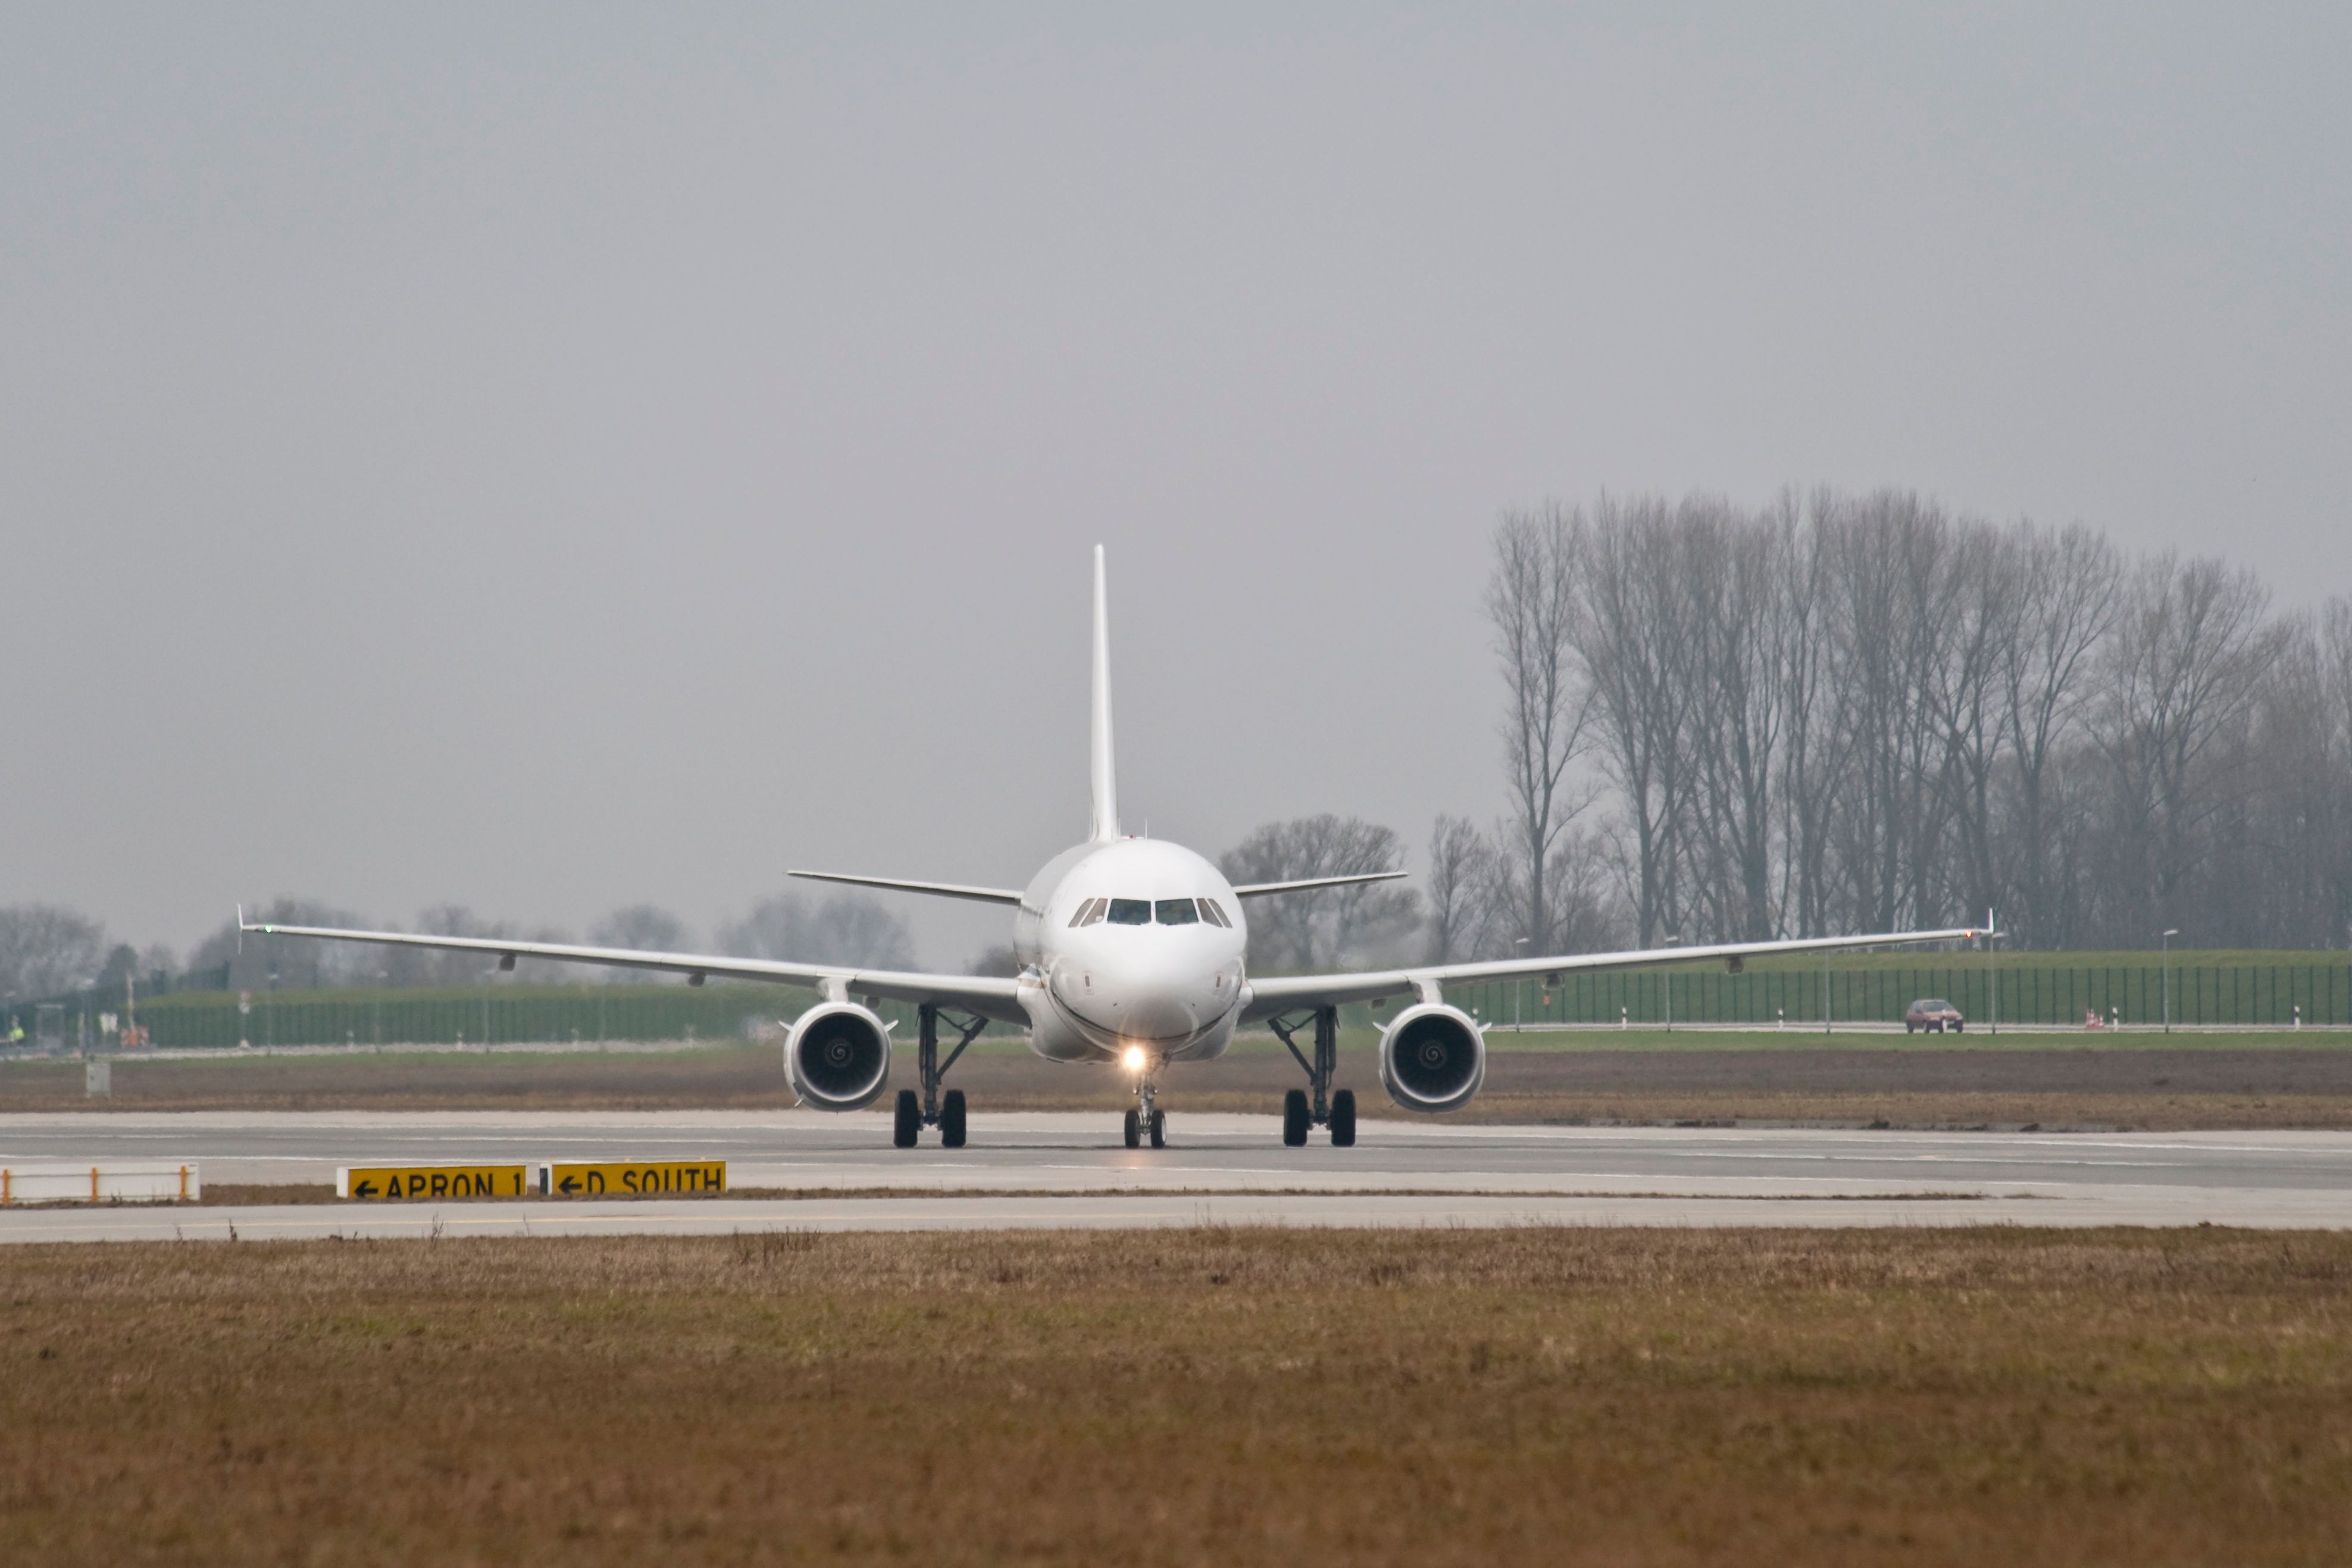 An Airbus A319 Taxiing at an airport.